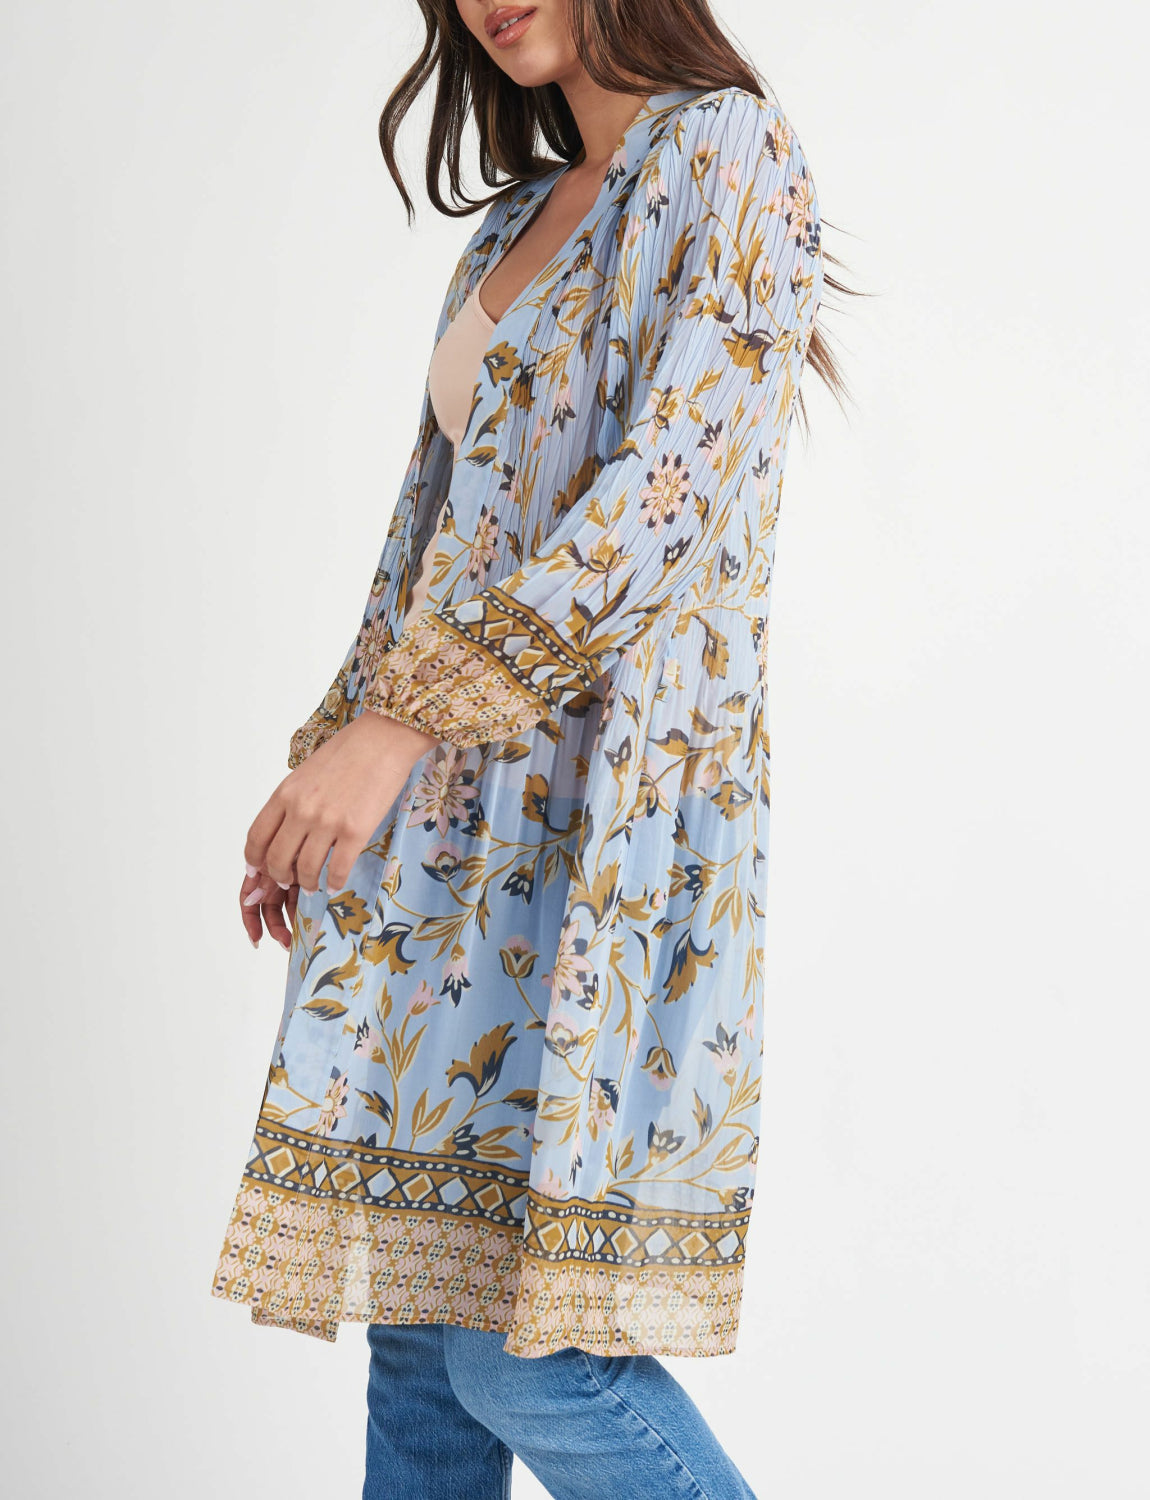 Dr2 Floral Kimono Cover-Up Cardigan